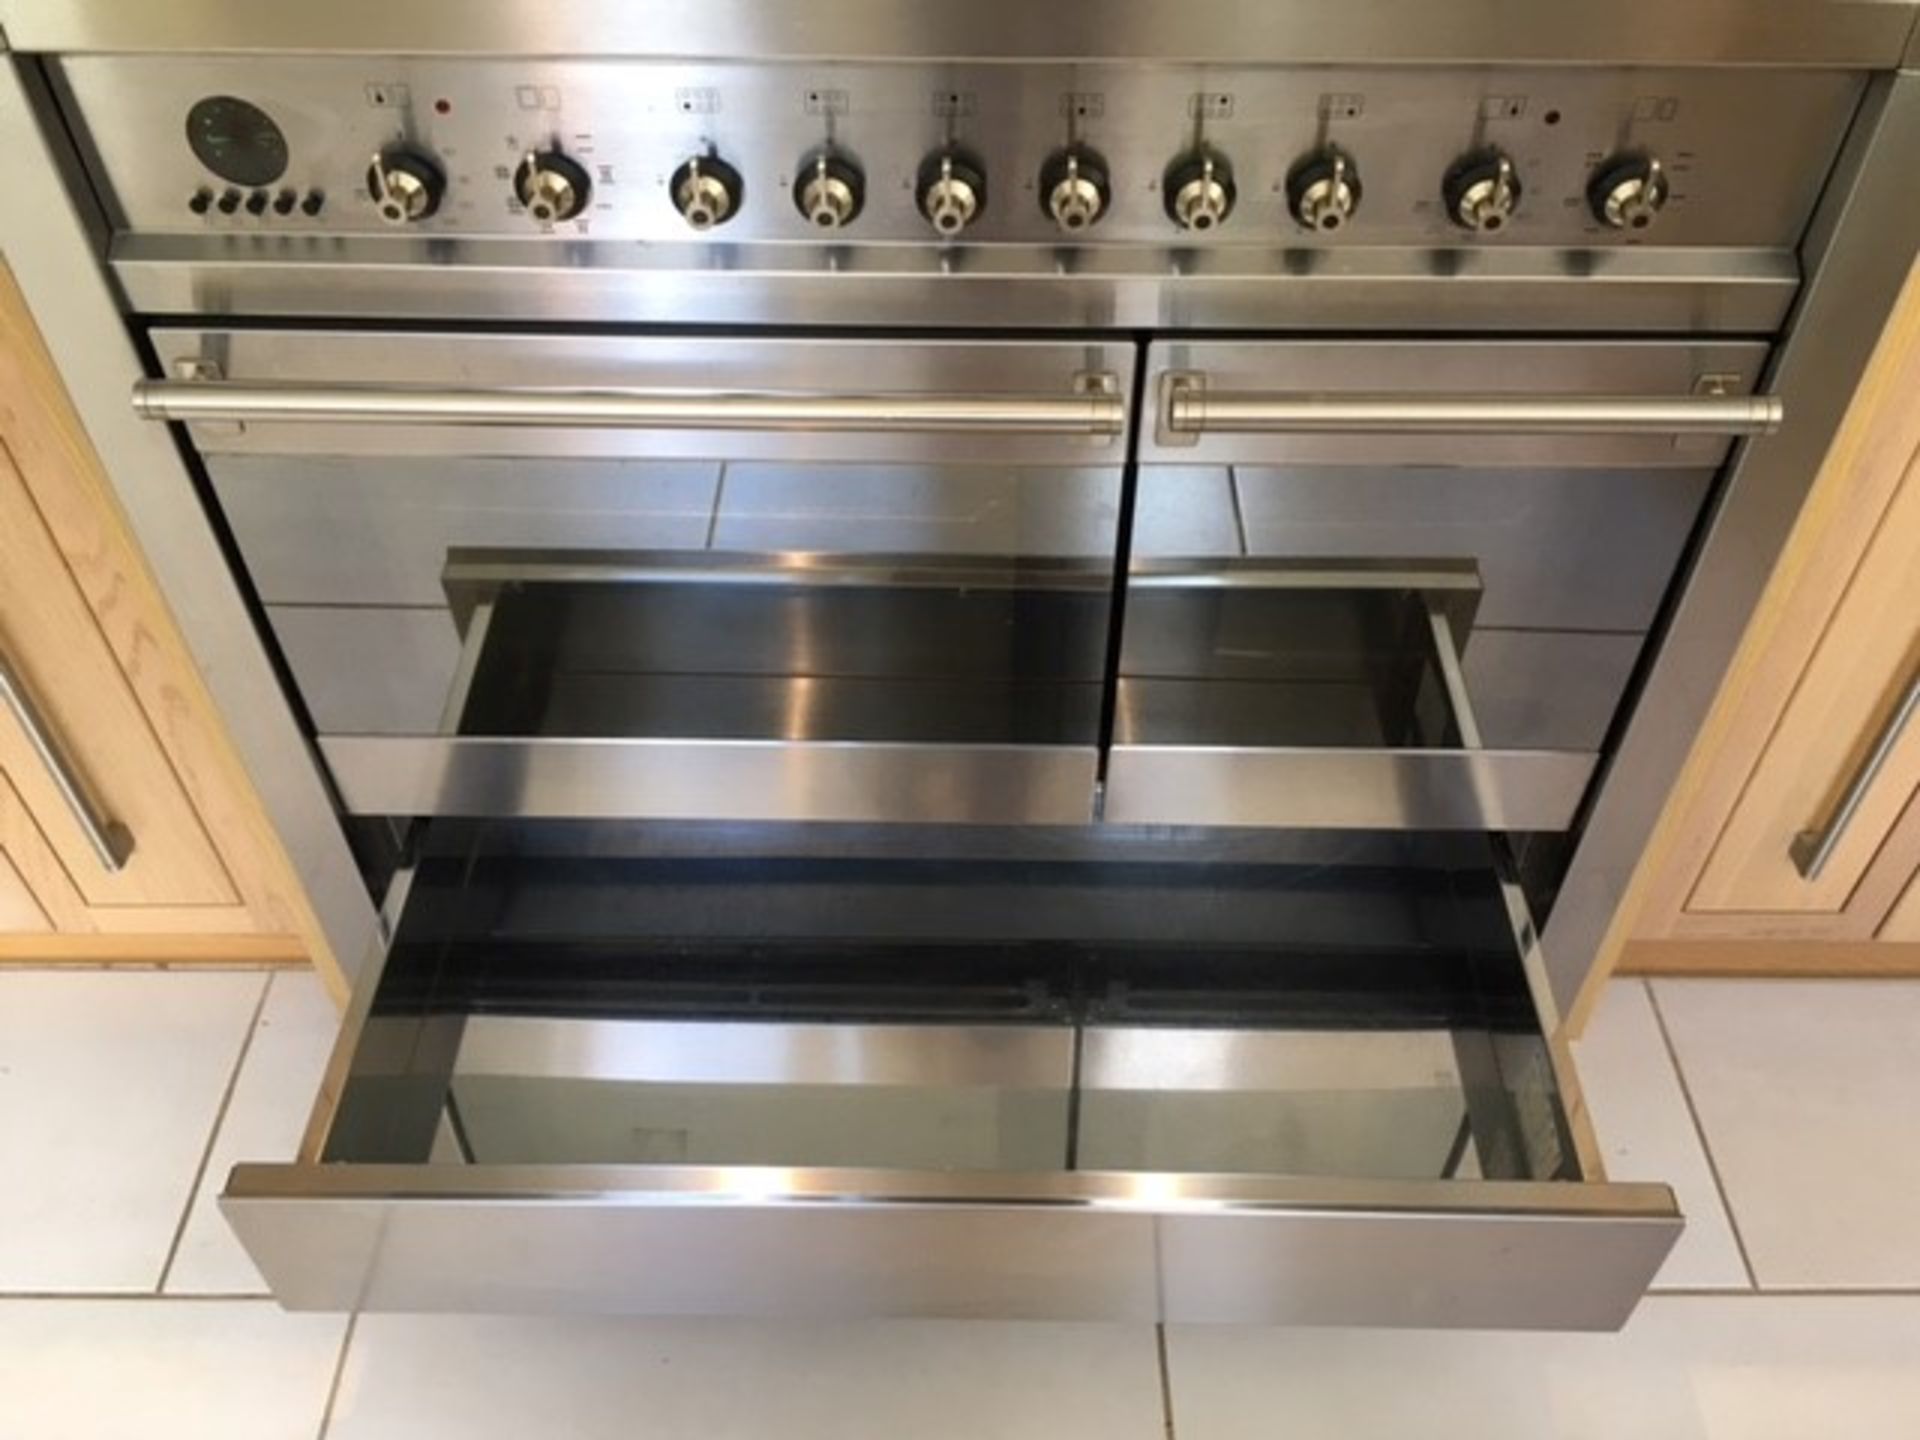 1 x Smeg Stainless Steel A2-5 Dual Fuel 6 Burner Cooker With Smeg Extractor, and Splashback - - Image 10 of 14